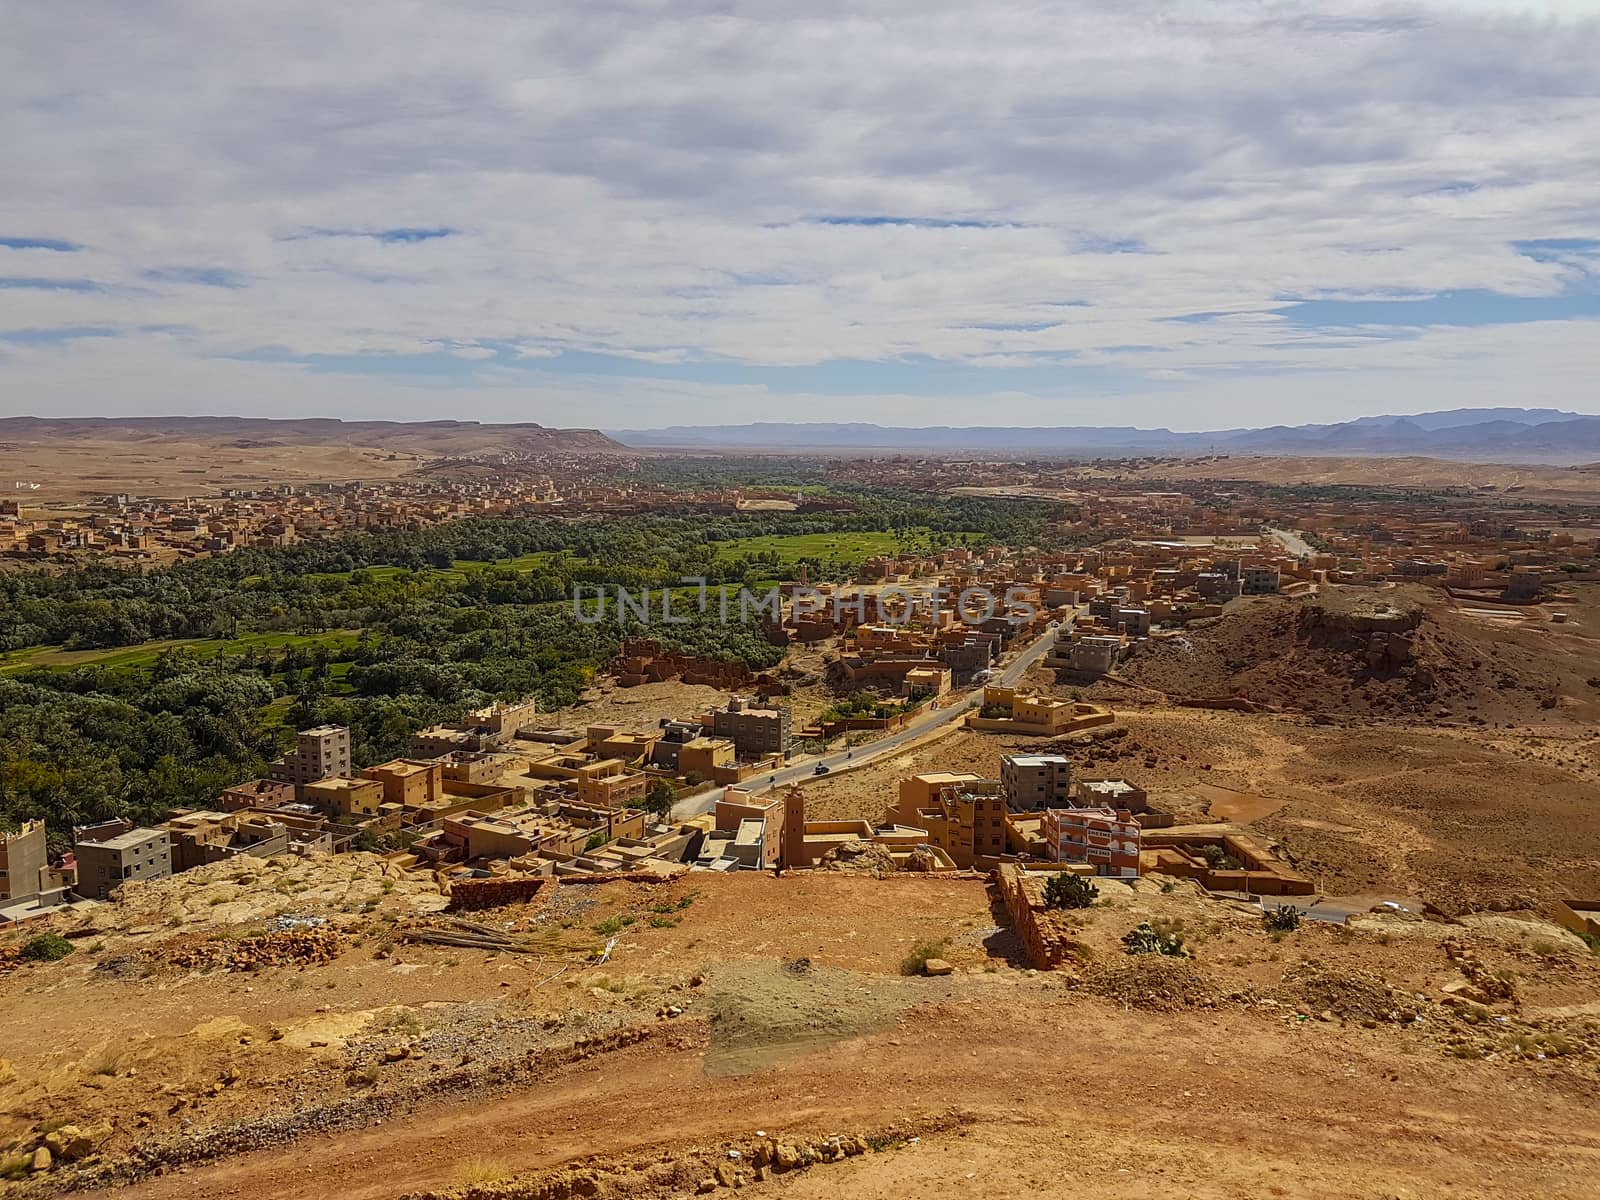 View from a hilltop in Morocco.